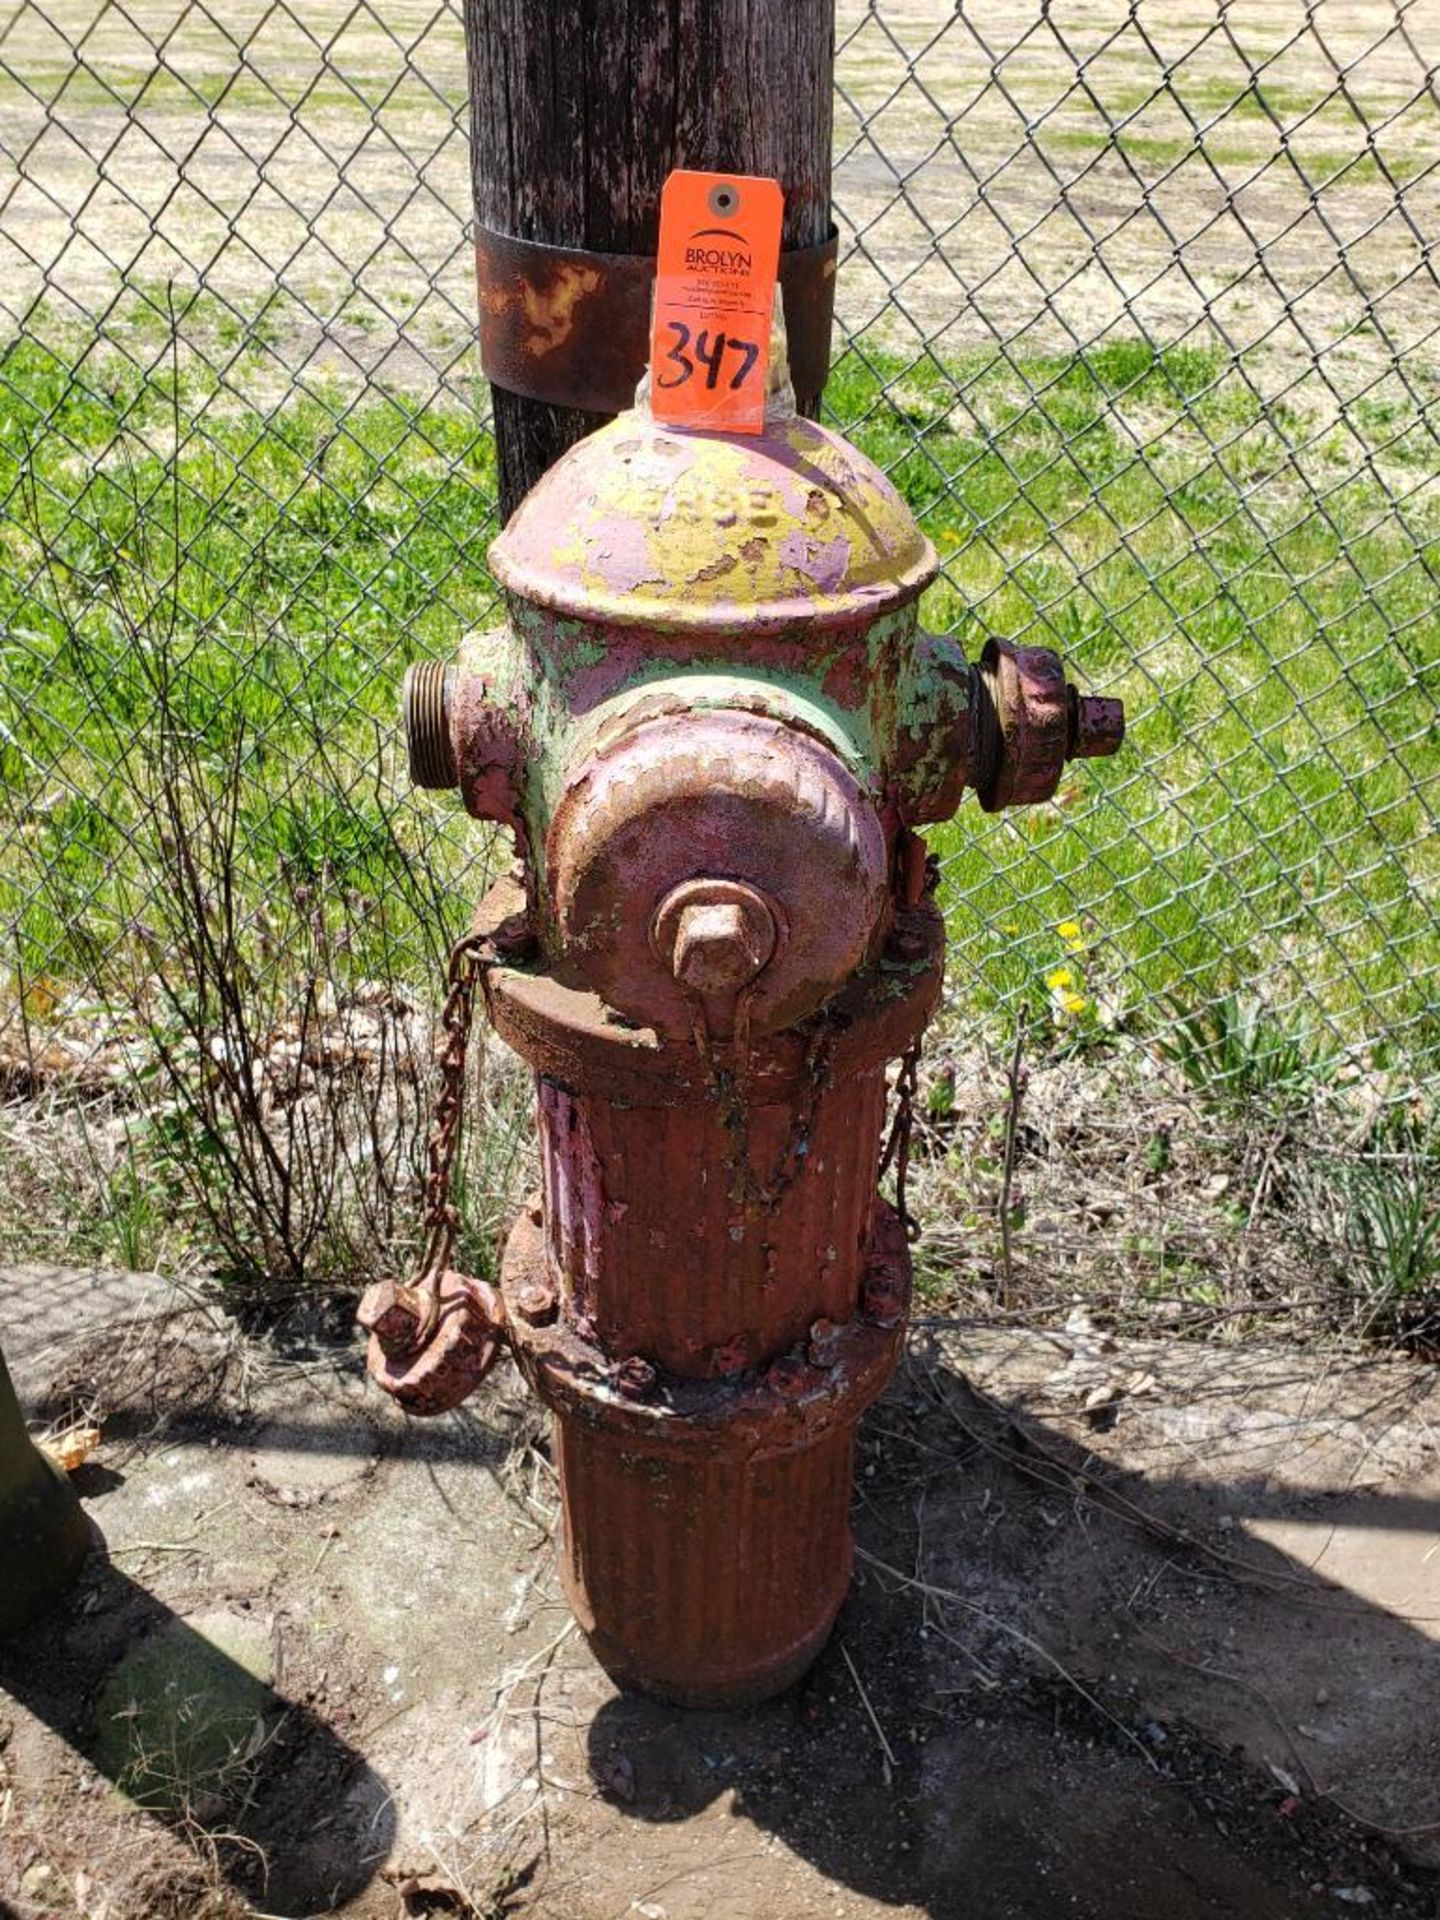 Fire hydrant.